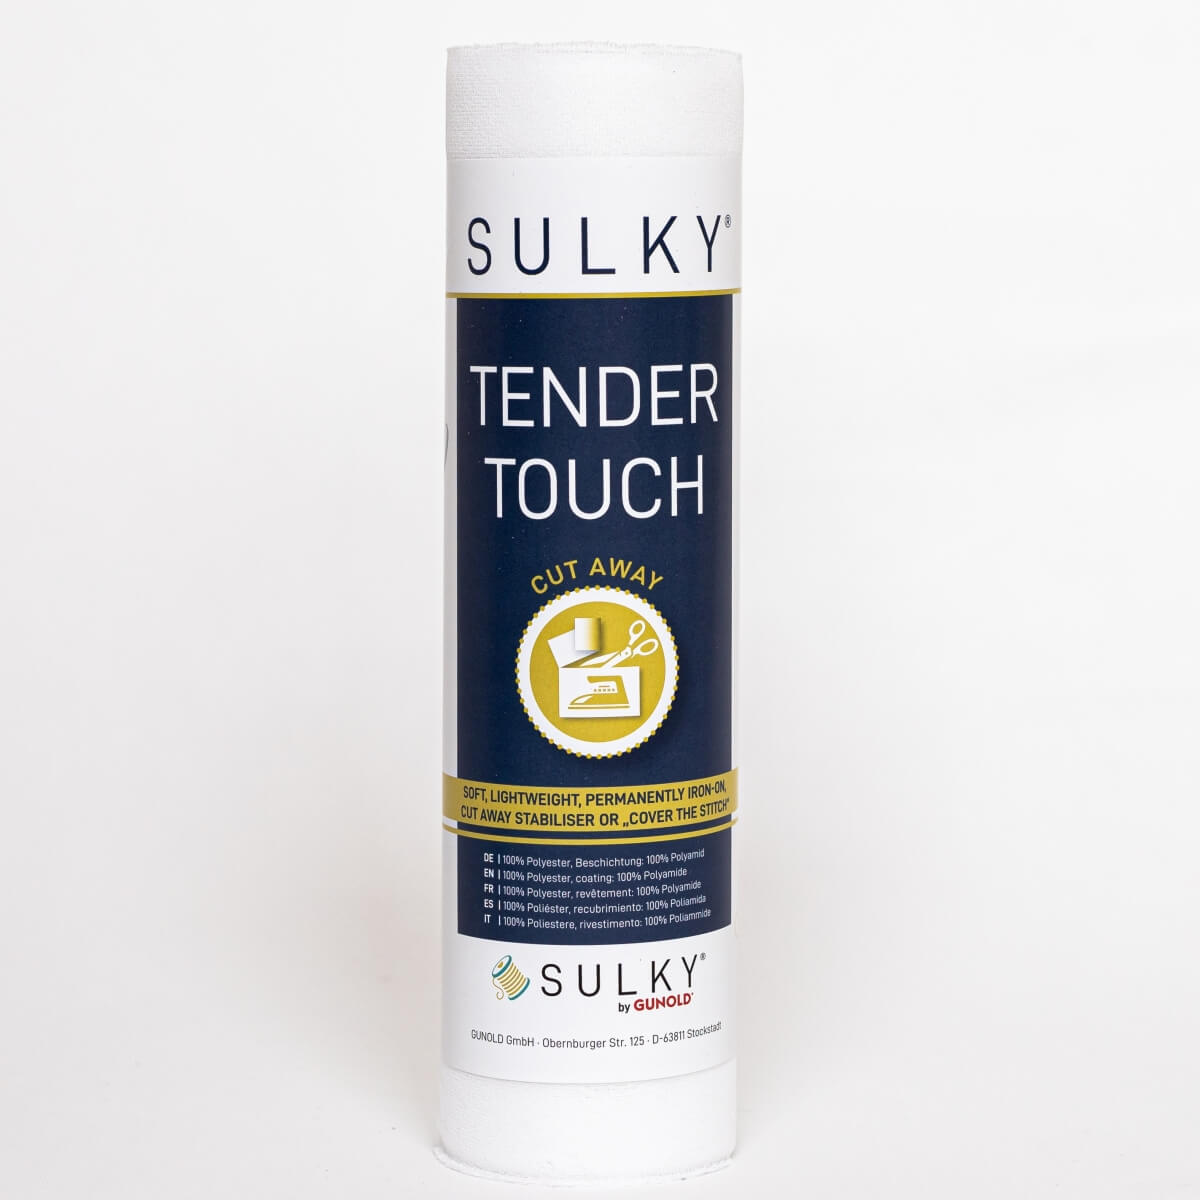 SULKY® TENDER TOUCH white, 25cm x 5m